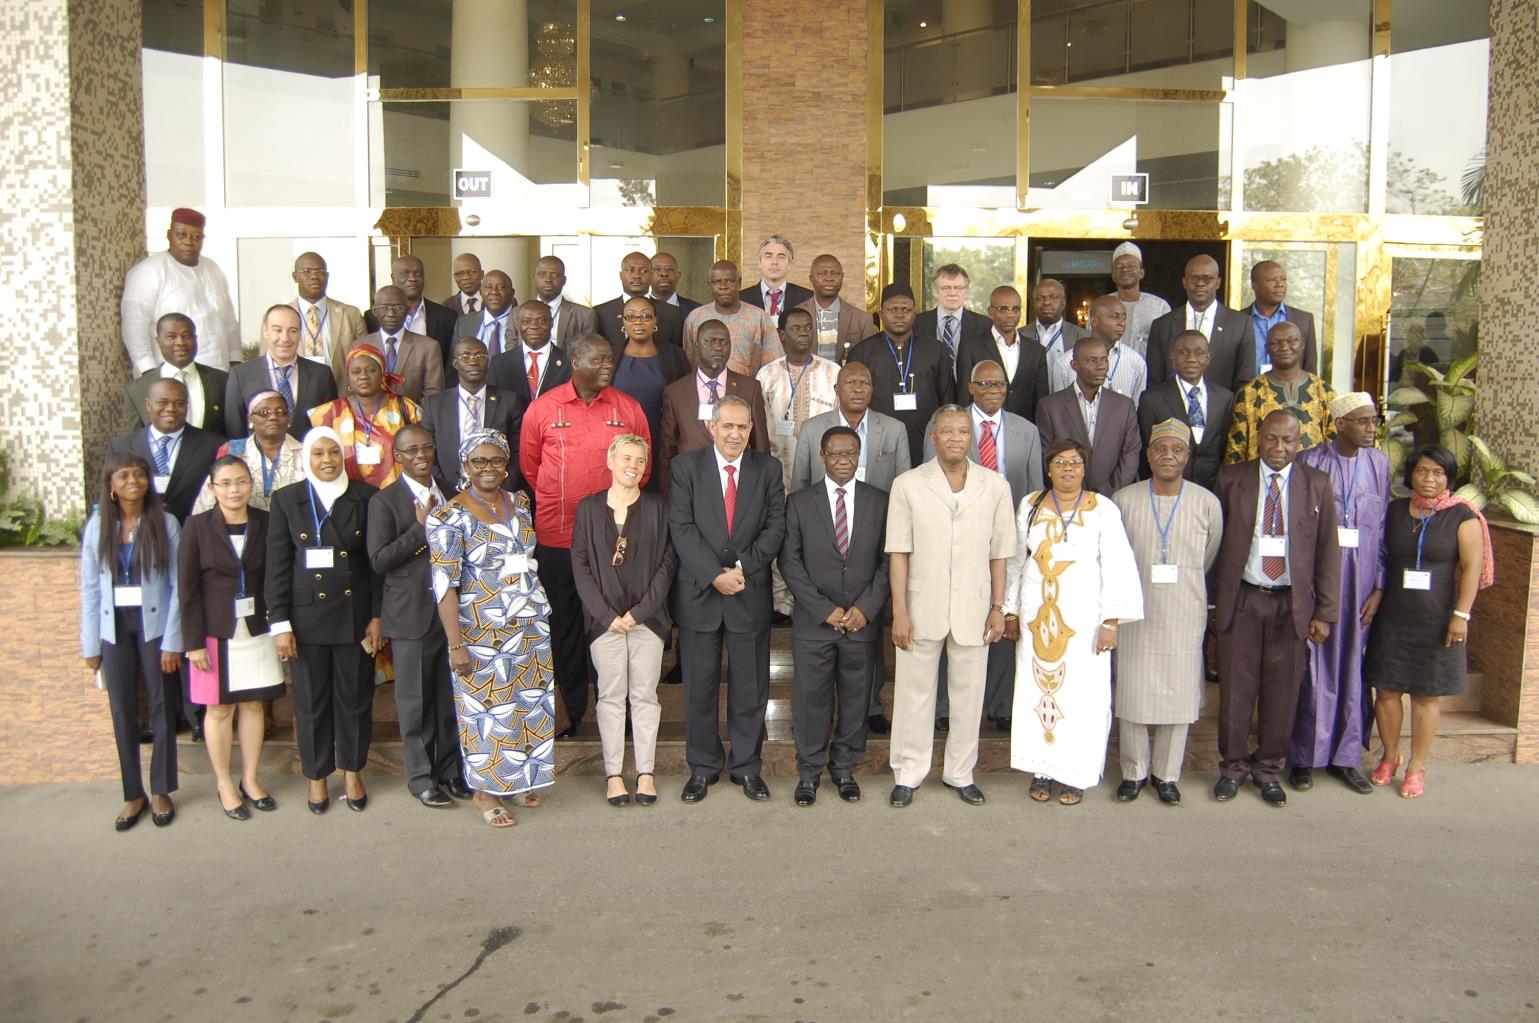  [© 2016 AU-IBAR. Workshop on strengthening regional cooperation in monitoring, control and surveillance for effective fight against illegal, unreported and unregulated fishing in West Africa, 15-17 February 2016, Abuja, Nigeria.] © 2016 AU-IBAR. Workshop on strengthening regional cooperation in monitoring, control and surveillance for effective fight against illegal, unreported and unregulated fishing in West Africa, 15-17 February 2016, Abuja, Nigeria.